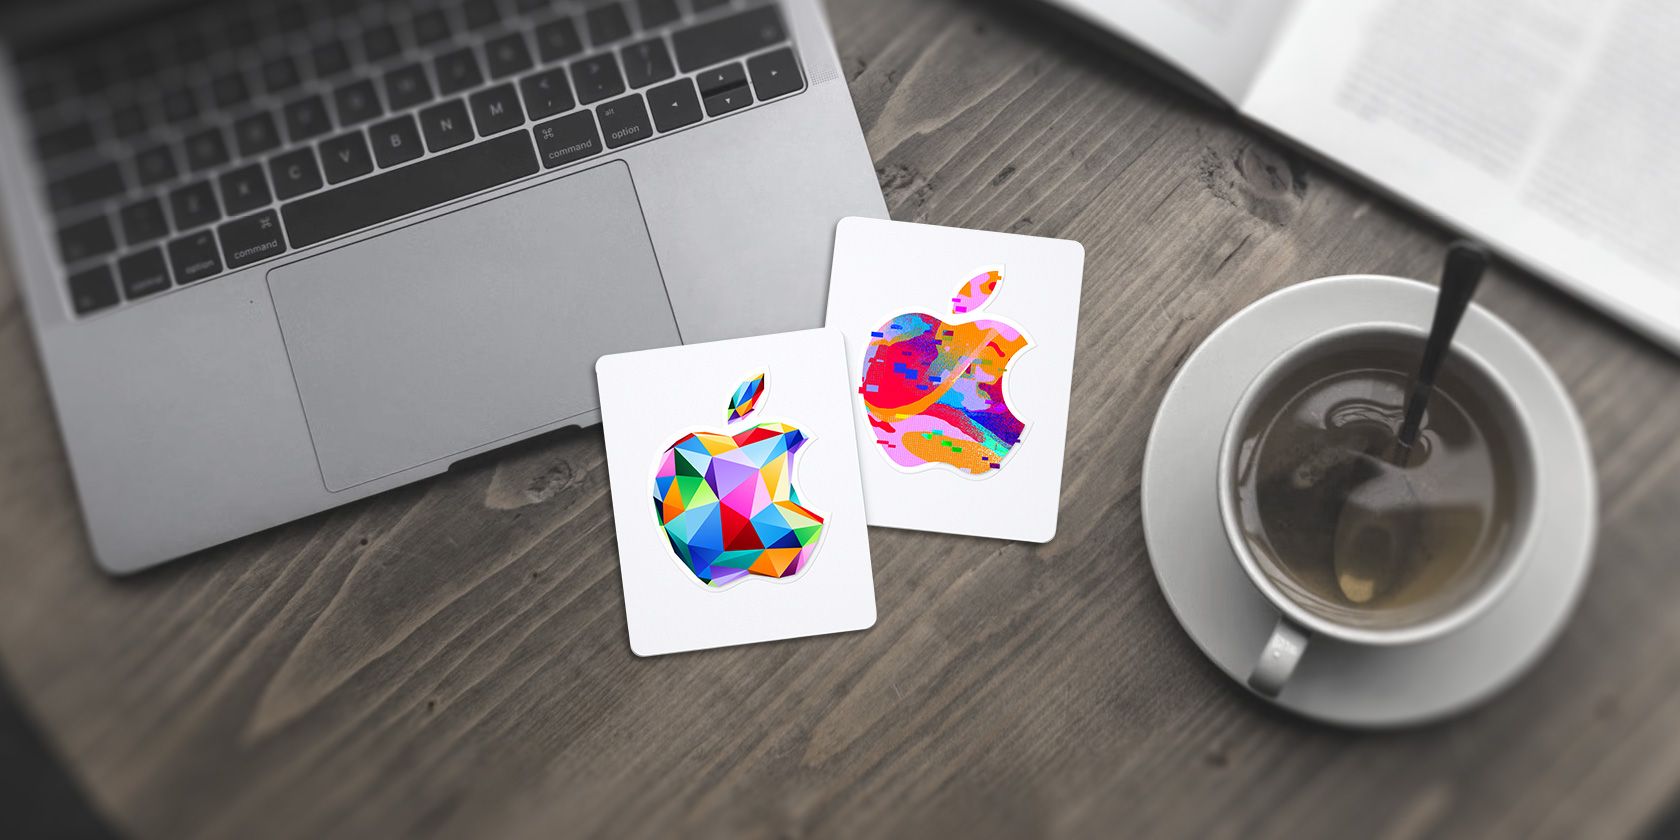 Apple Gift Cards on table with Macbook